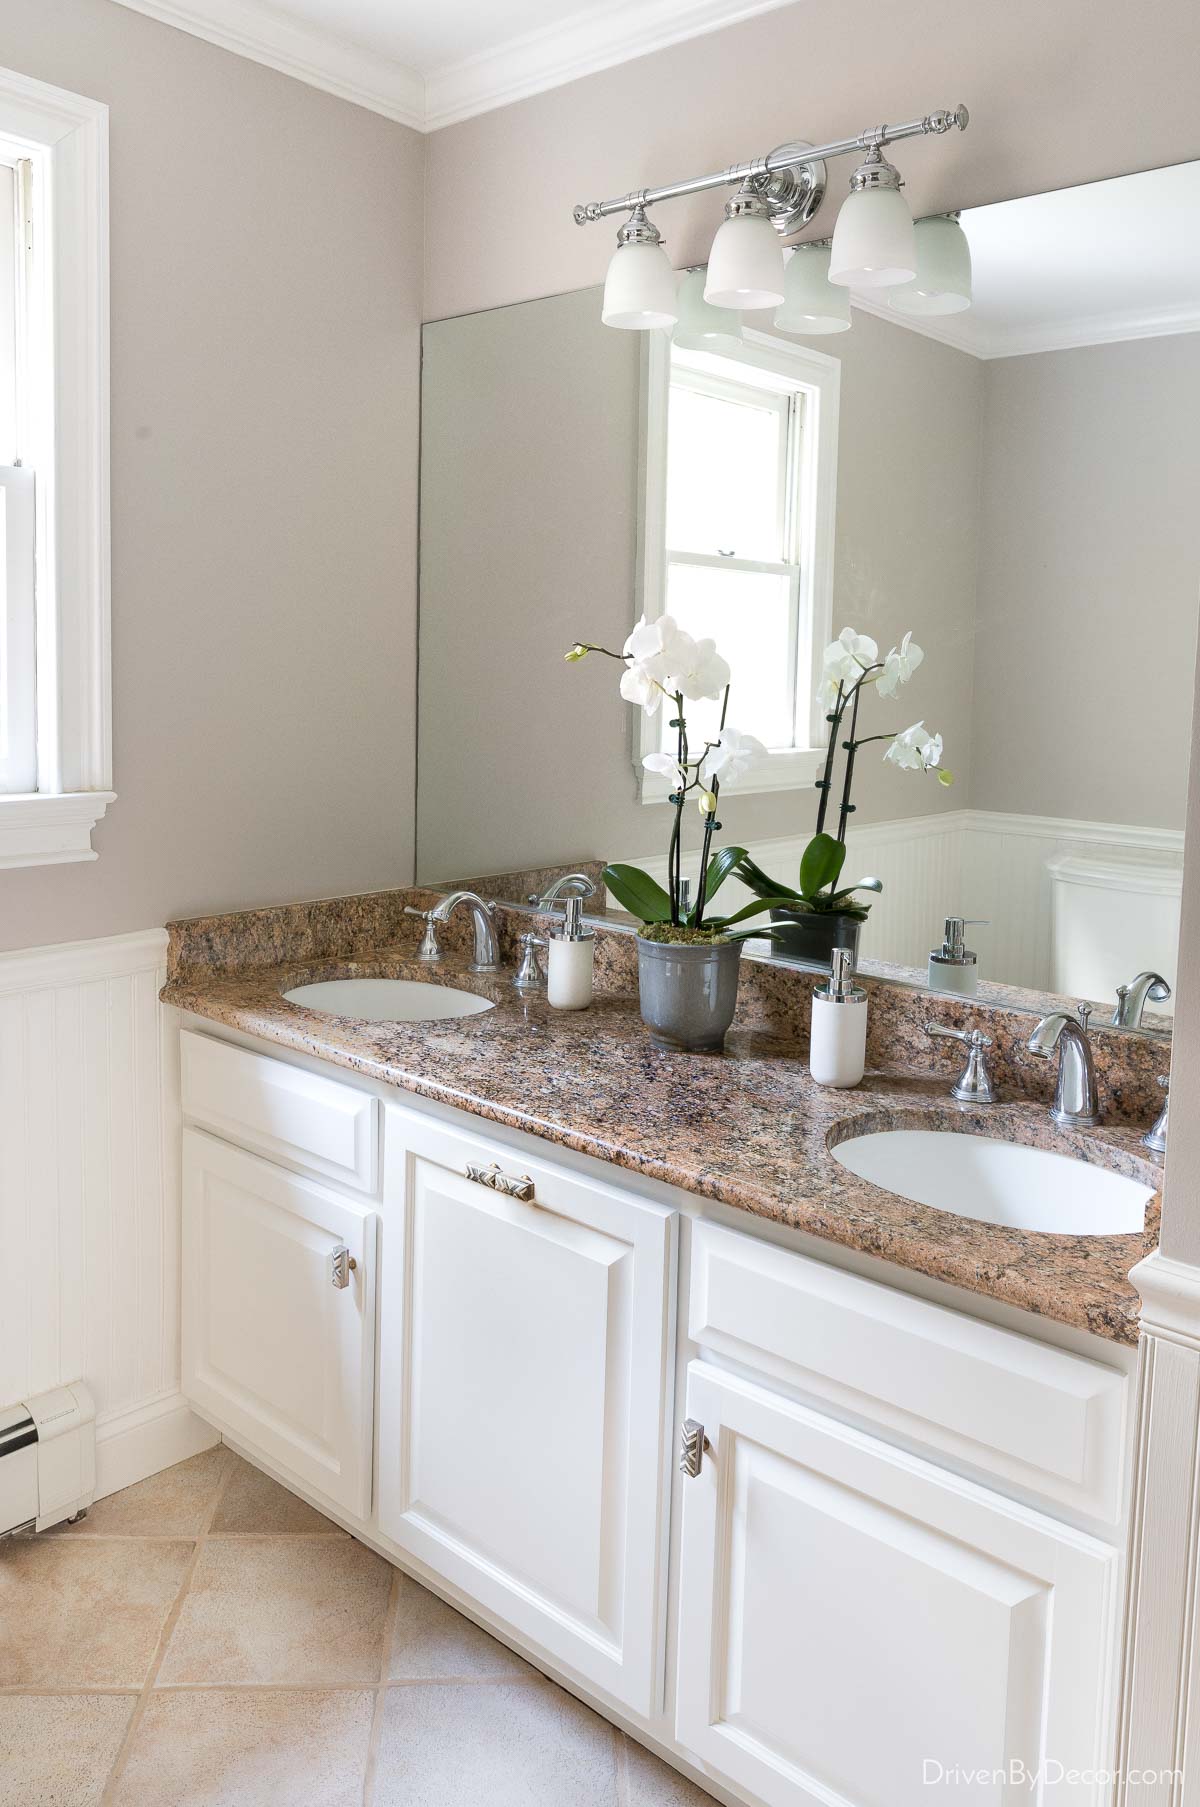 A simple swap of the vanity light shades gives it a whole new look!